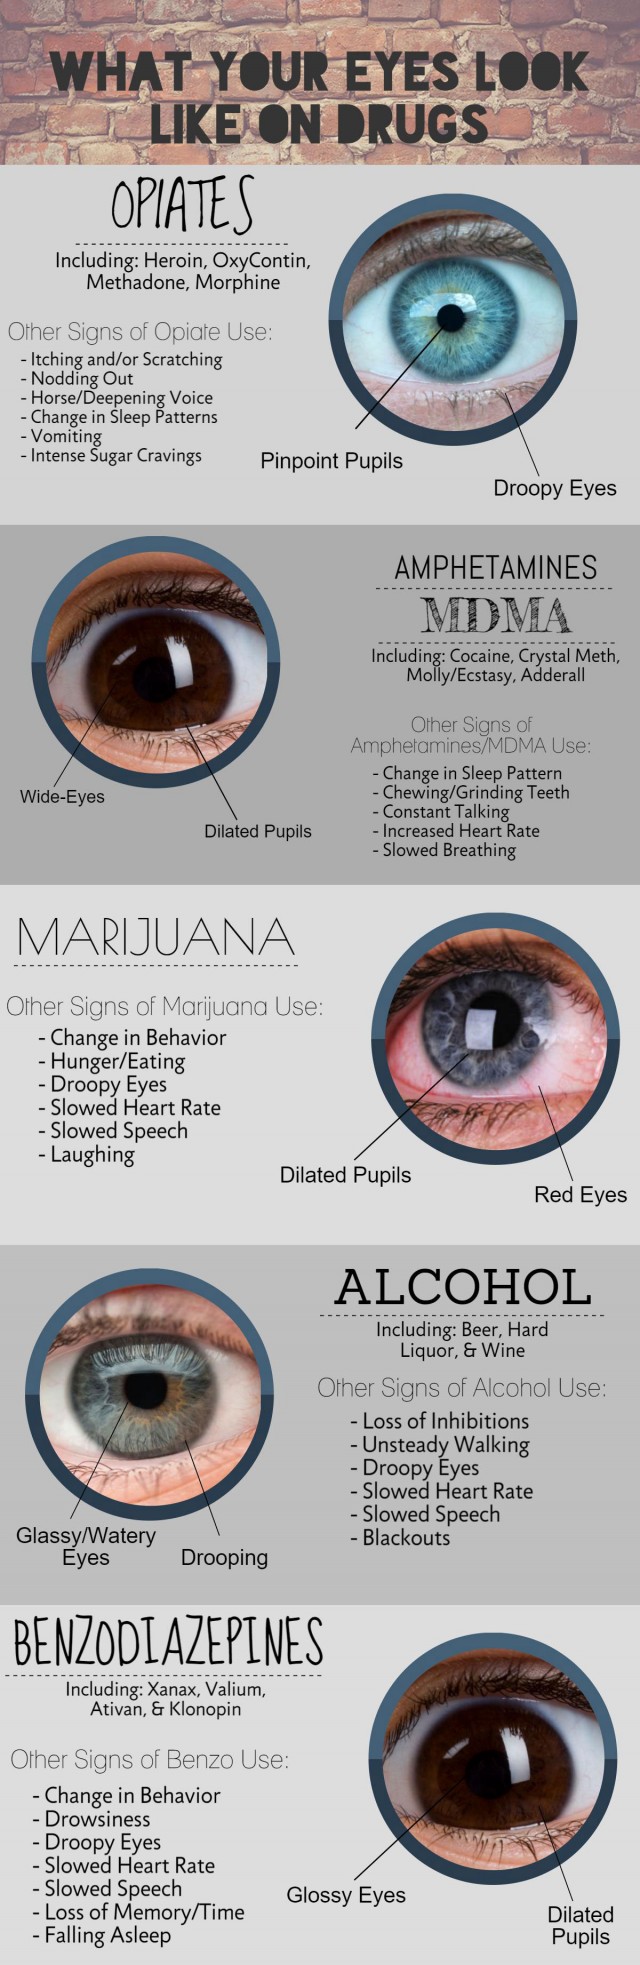 whats your eyes look like on drugs